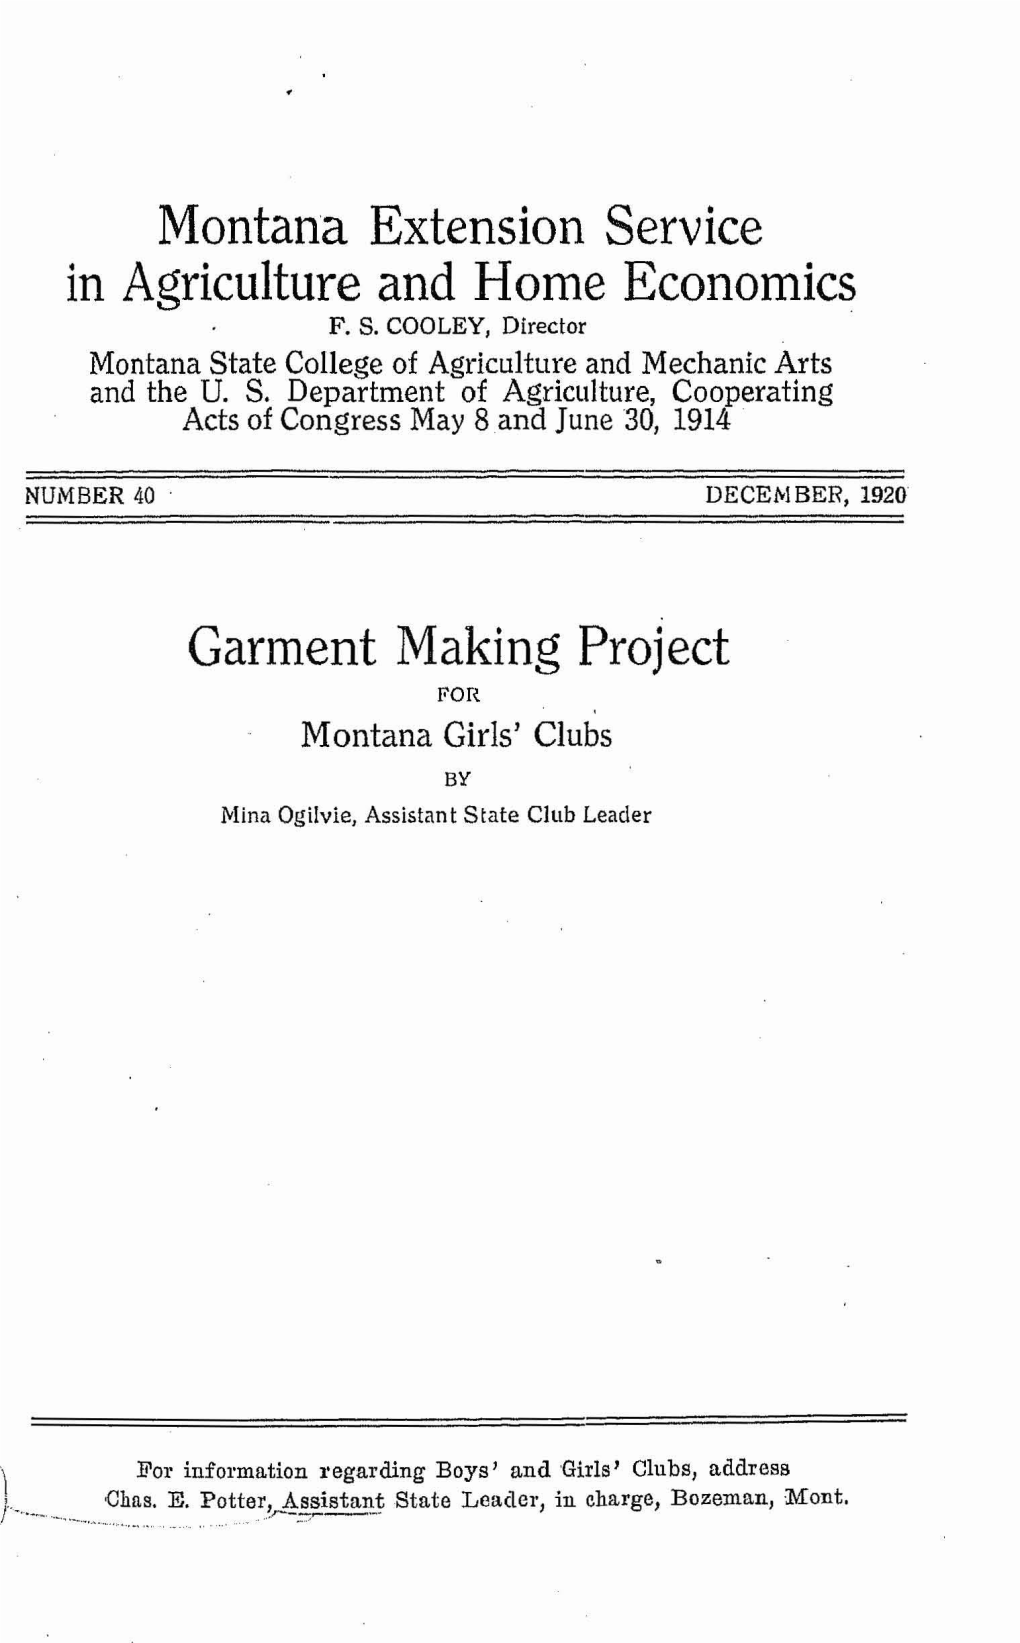 Montana Extension Service in Agriculture and Home Economics Garment Making Project